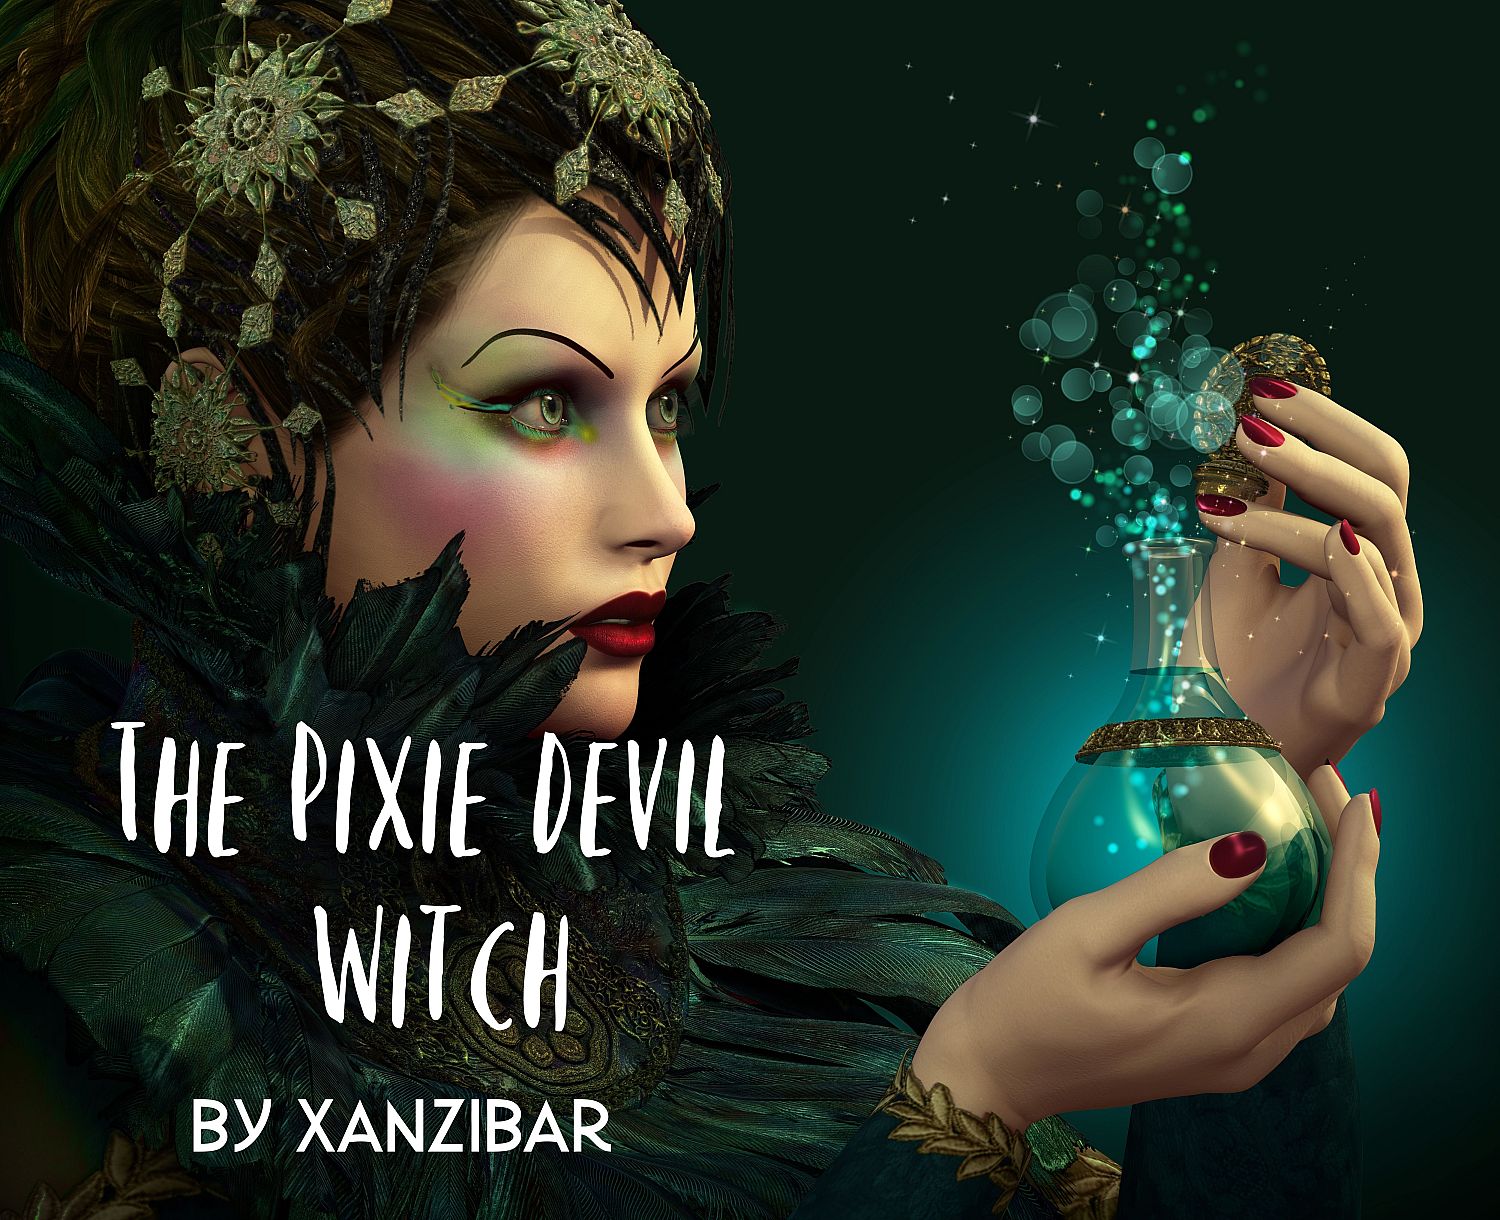 The Pixie Devil Witch. (Cinderella Tale Gone Wrong) - Cover